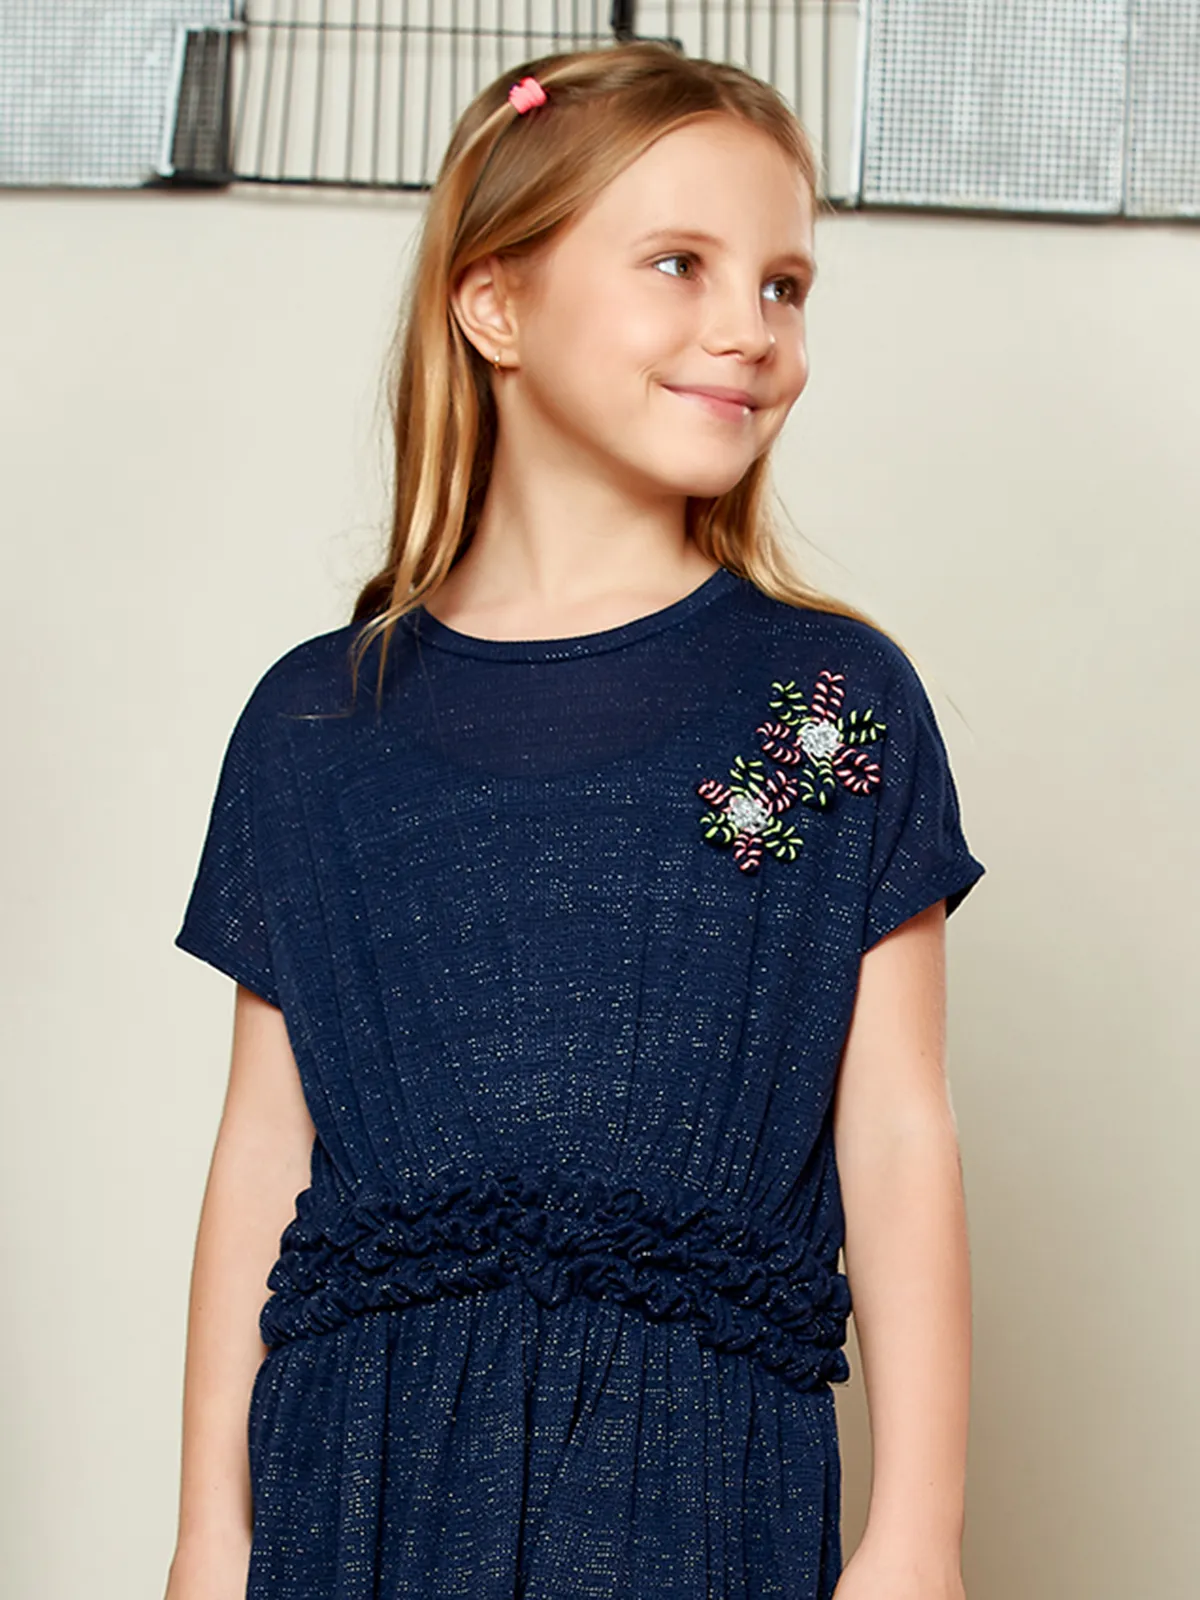 Leo n Babes navy knitted frock with zari work